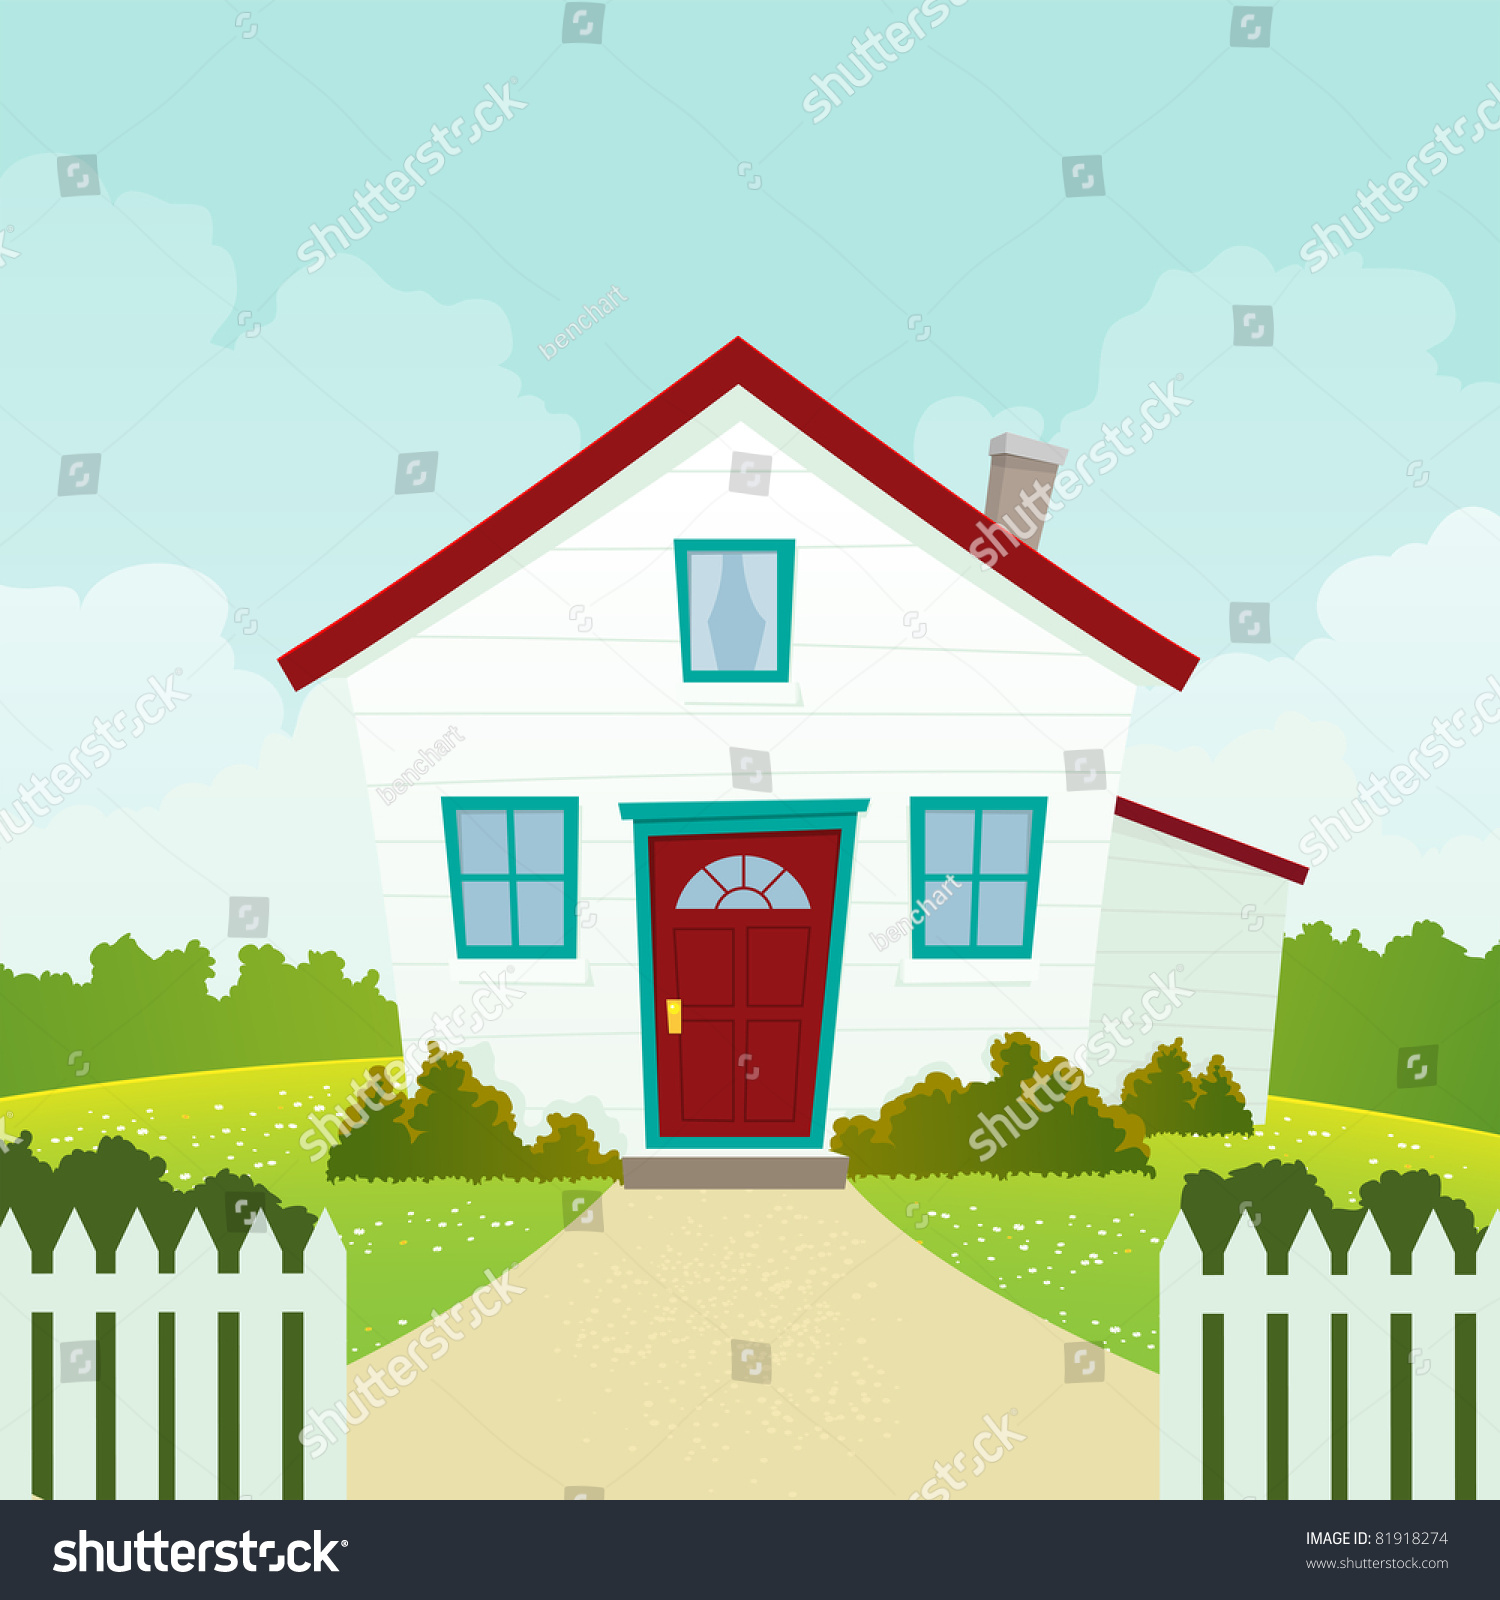 Home Sweet Home/ Illustration Of A Friendly And Welcoming American ...